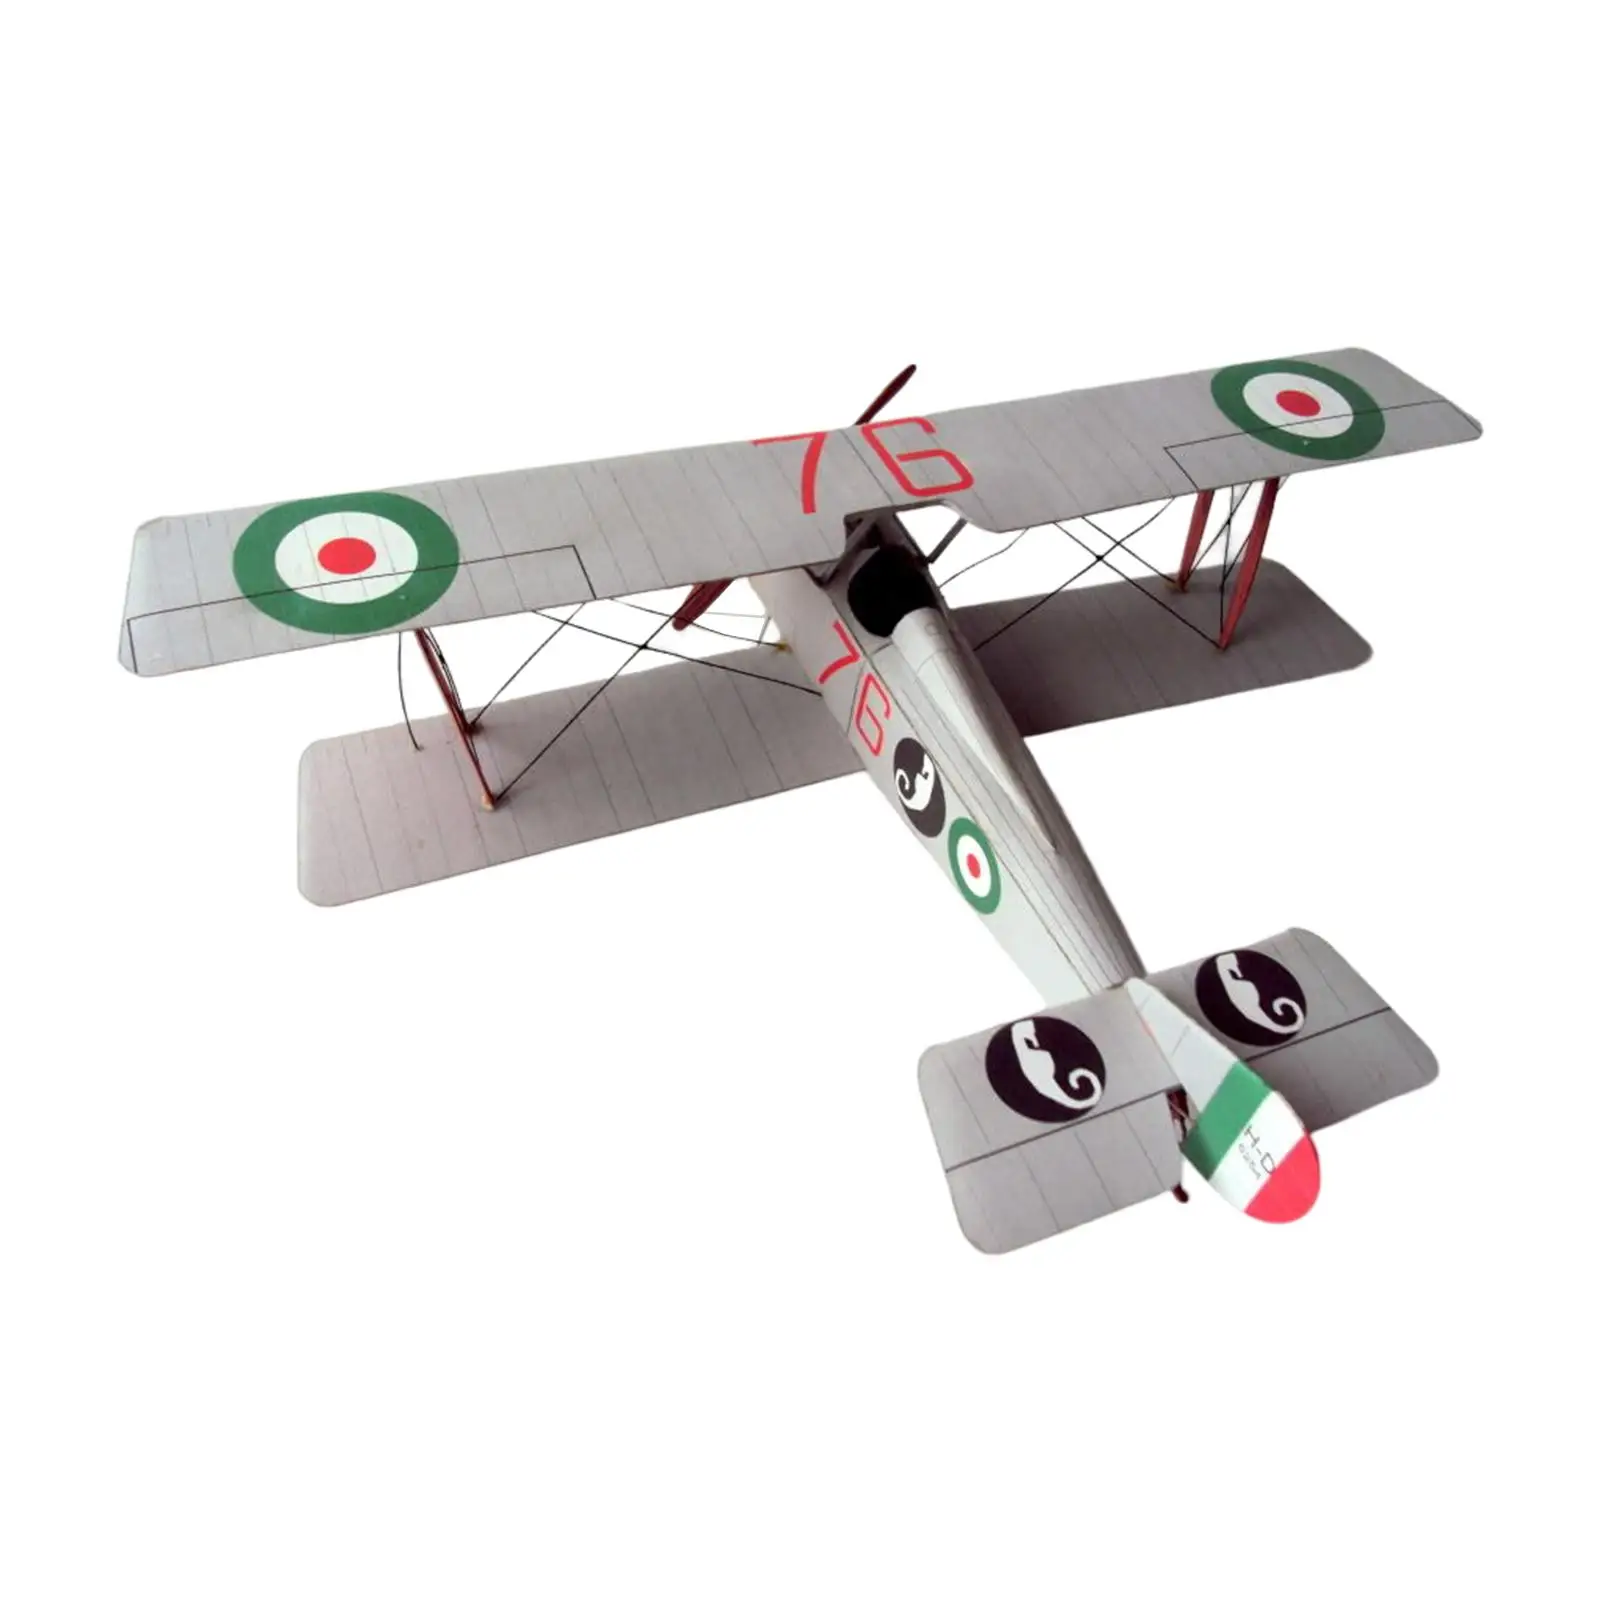 1/33 Brain Teaser Puzzle Education Toys Building Biplane Fighter DIY Assemble Toys Airplane Kits for Kids Adults Tabletop Decor